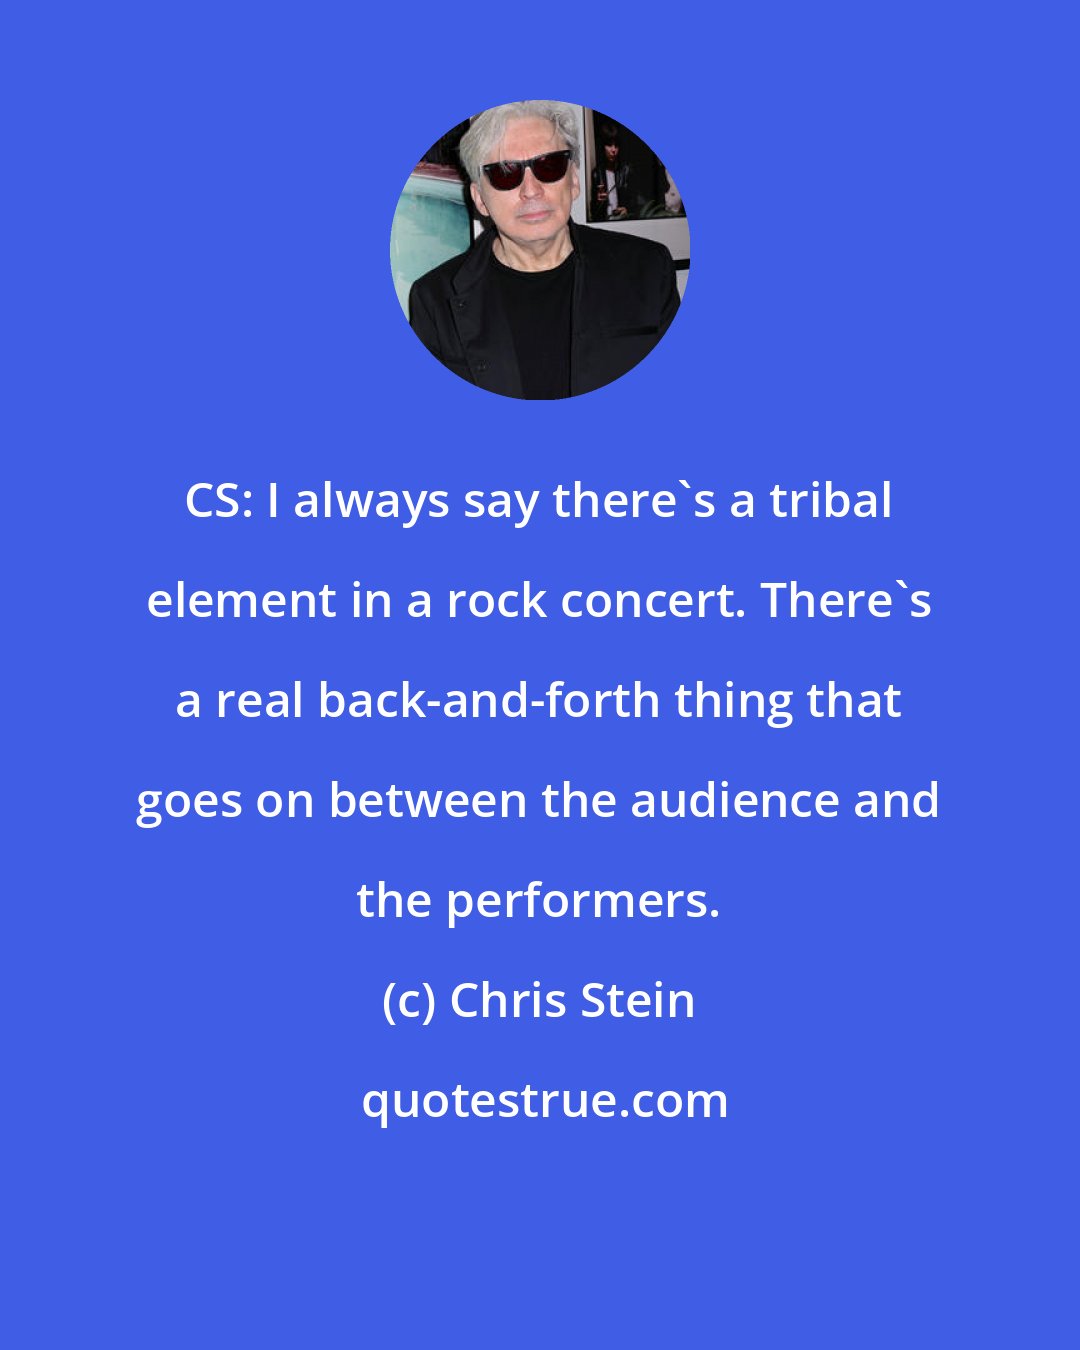 Chris Stein: CS: I always say there's a tribal element in a rock concert. There's a real back-and-forth thing that goes on between the audience and the performers.